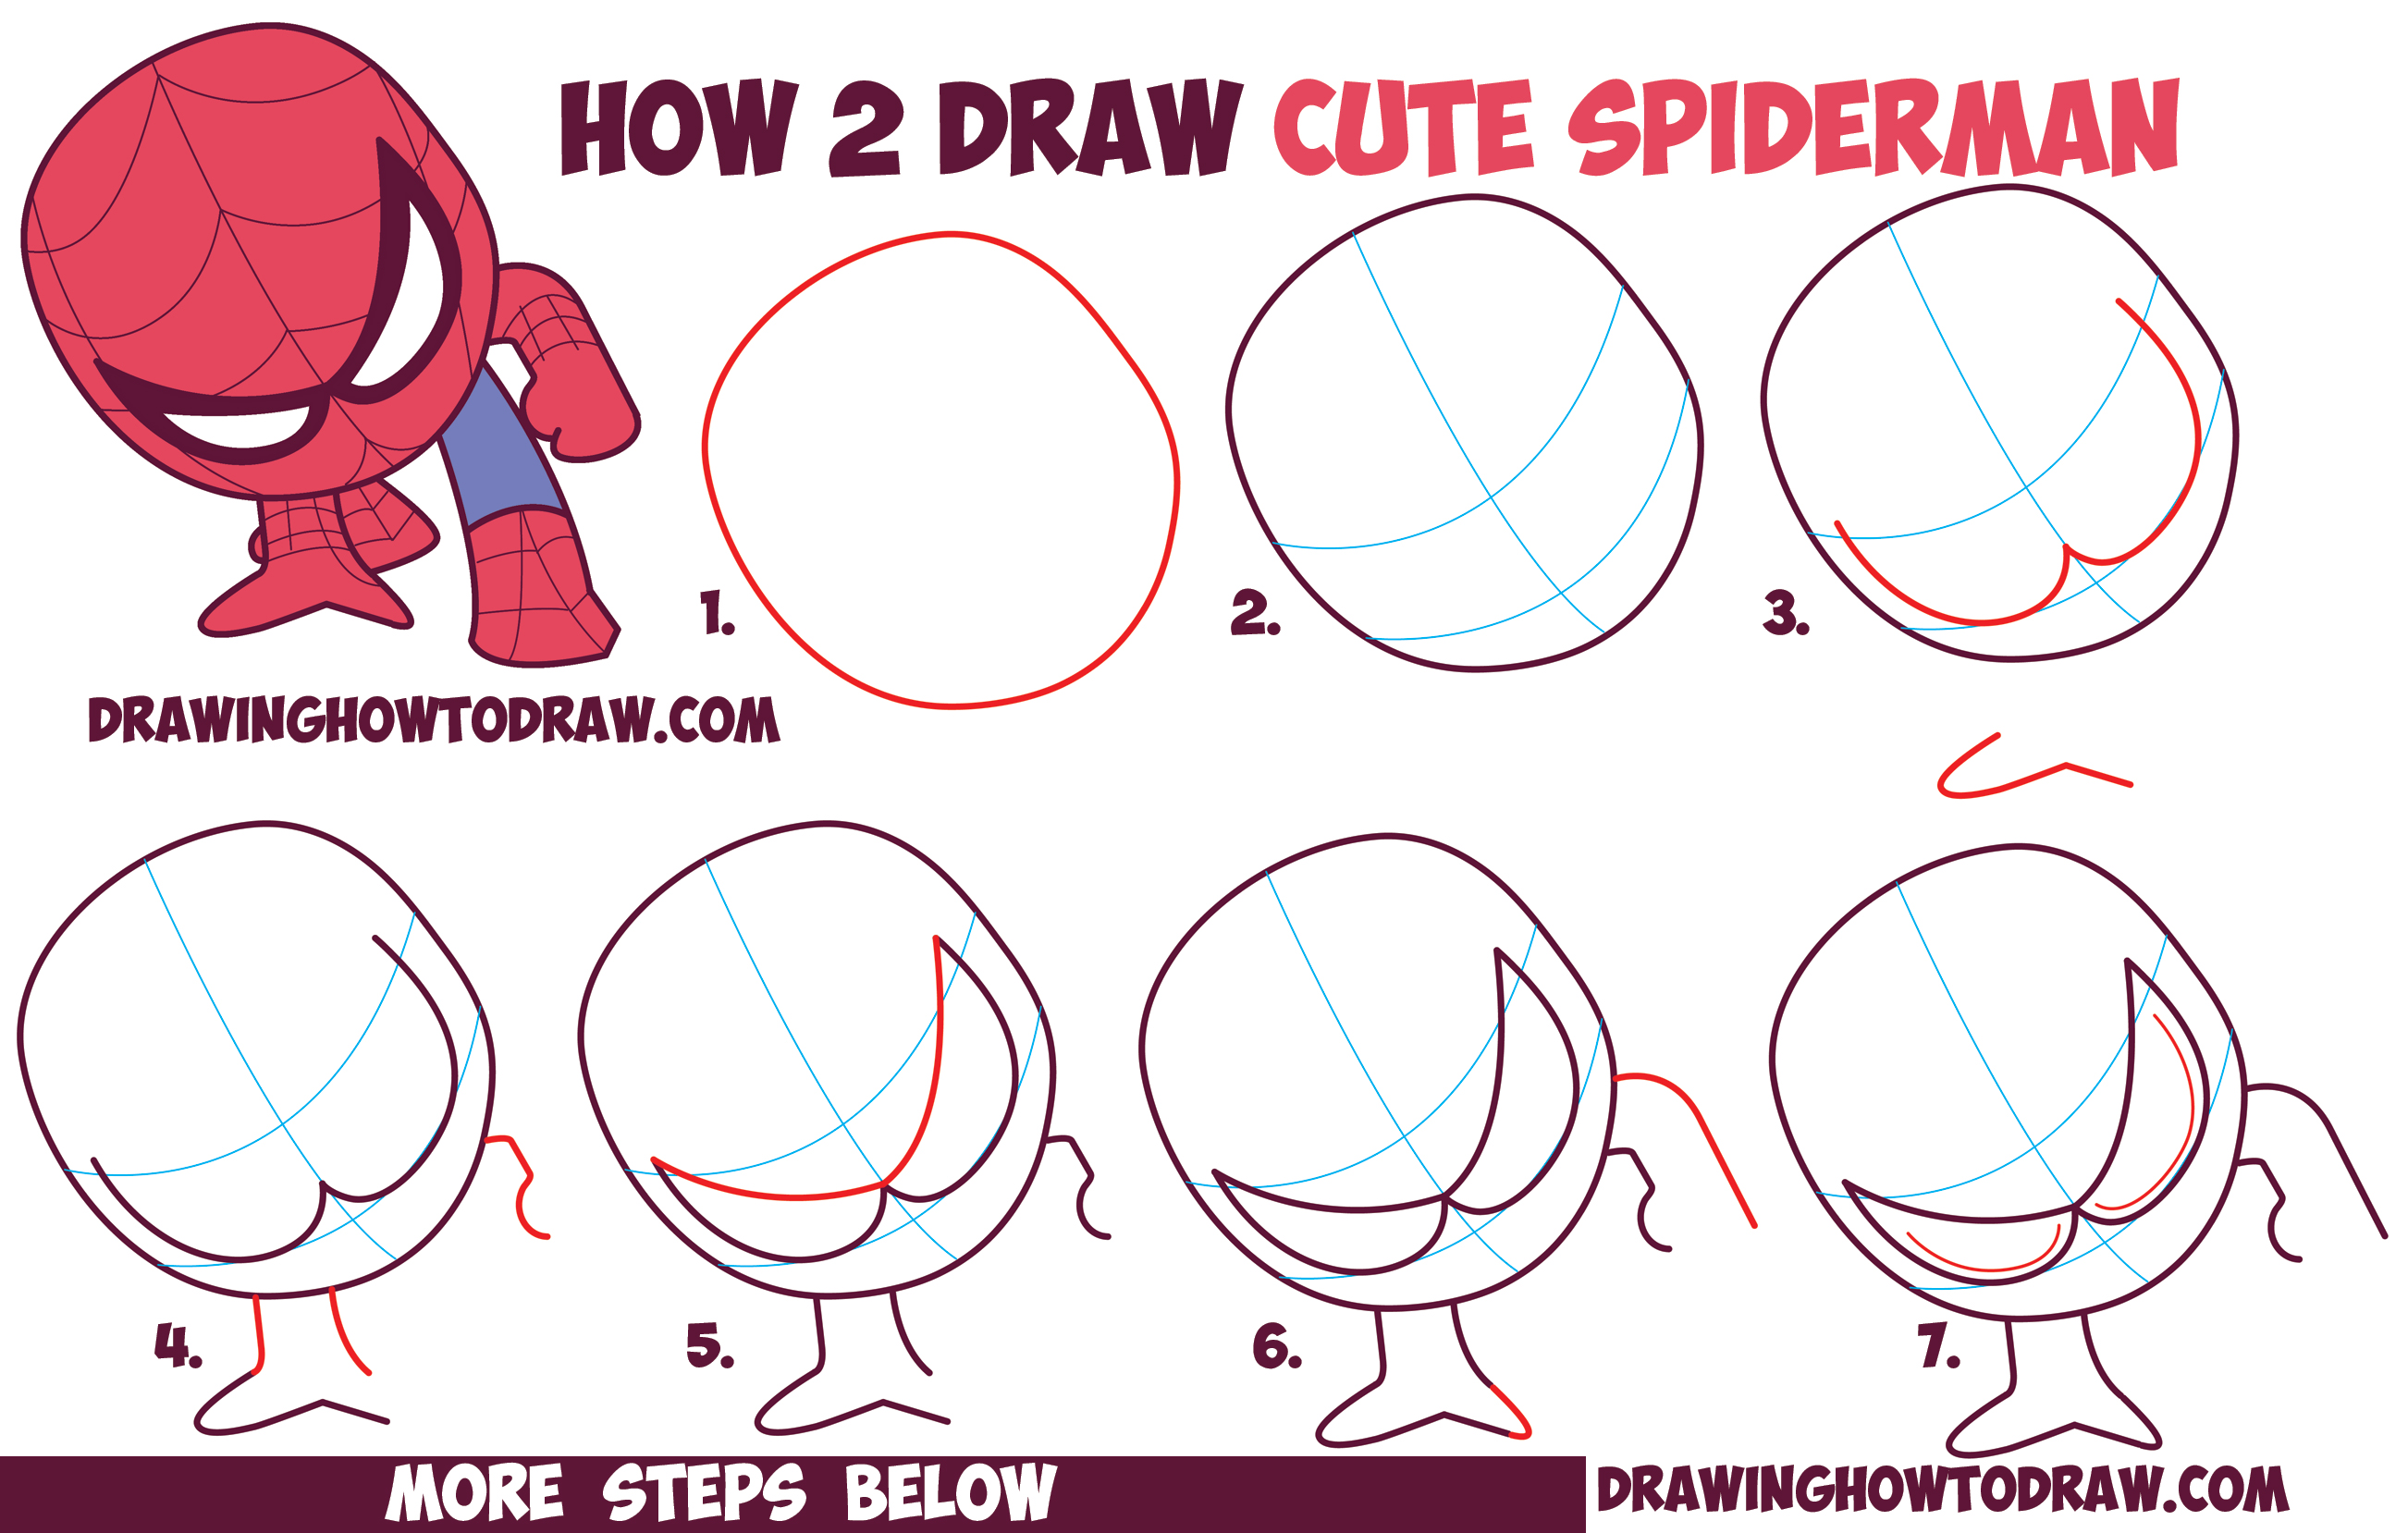 Spider - Man PS4 drawing tutorial easy by draw2night on DeviantArt-saigonsouth.com.vn